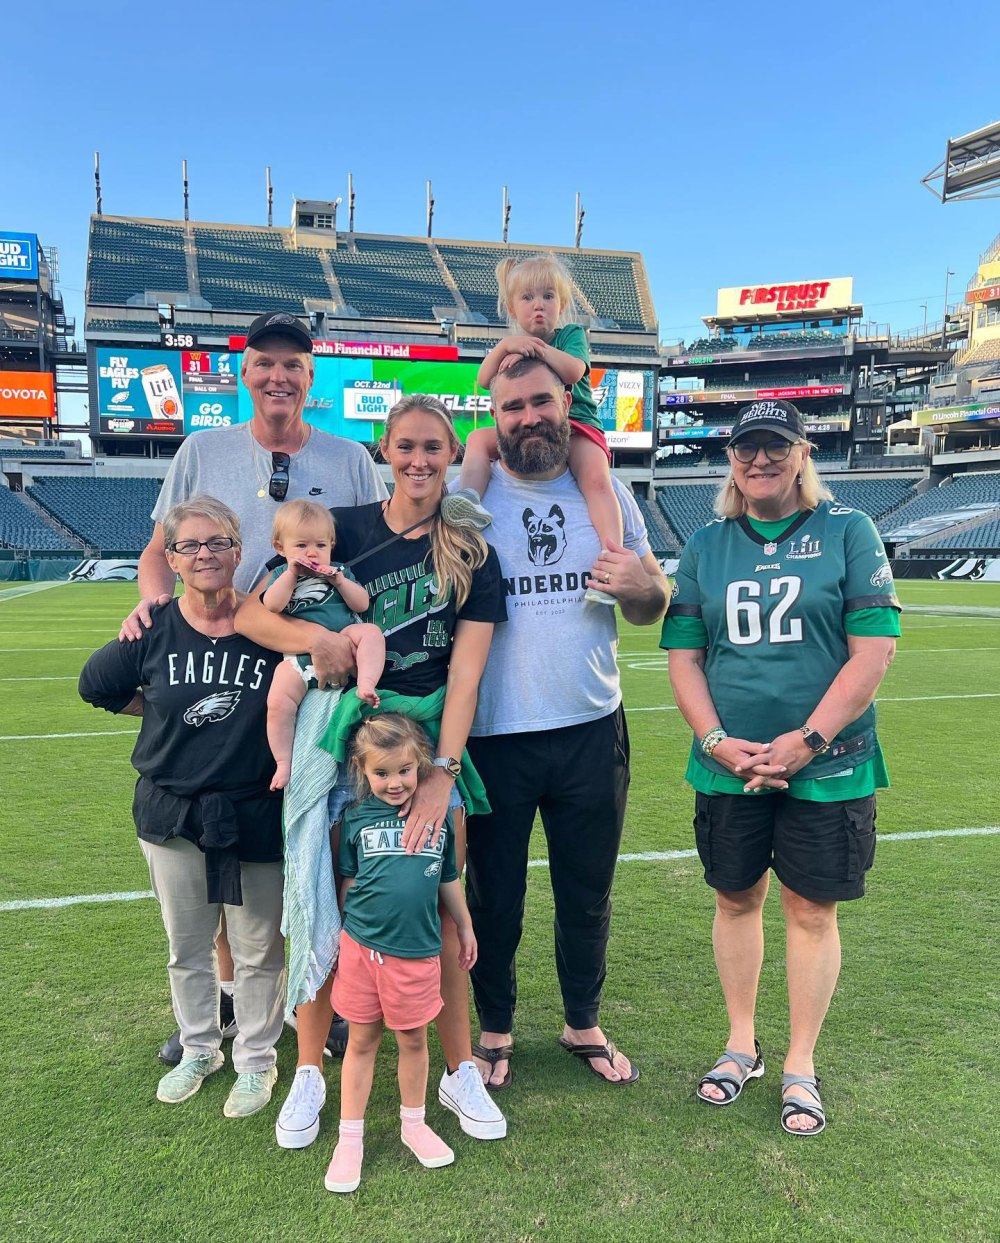 Jason Kelce Wife Kylie Celebrates Youngest Daughter's 1st Official Eagles Game 3